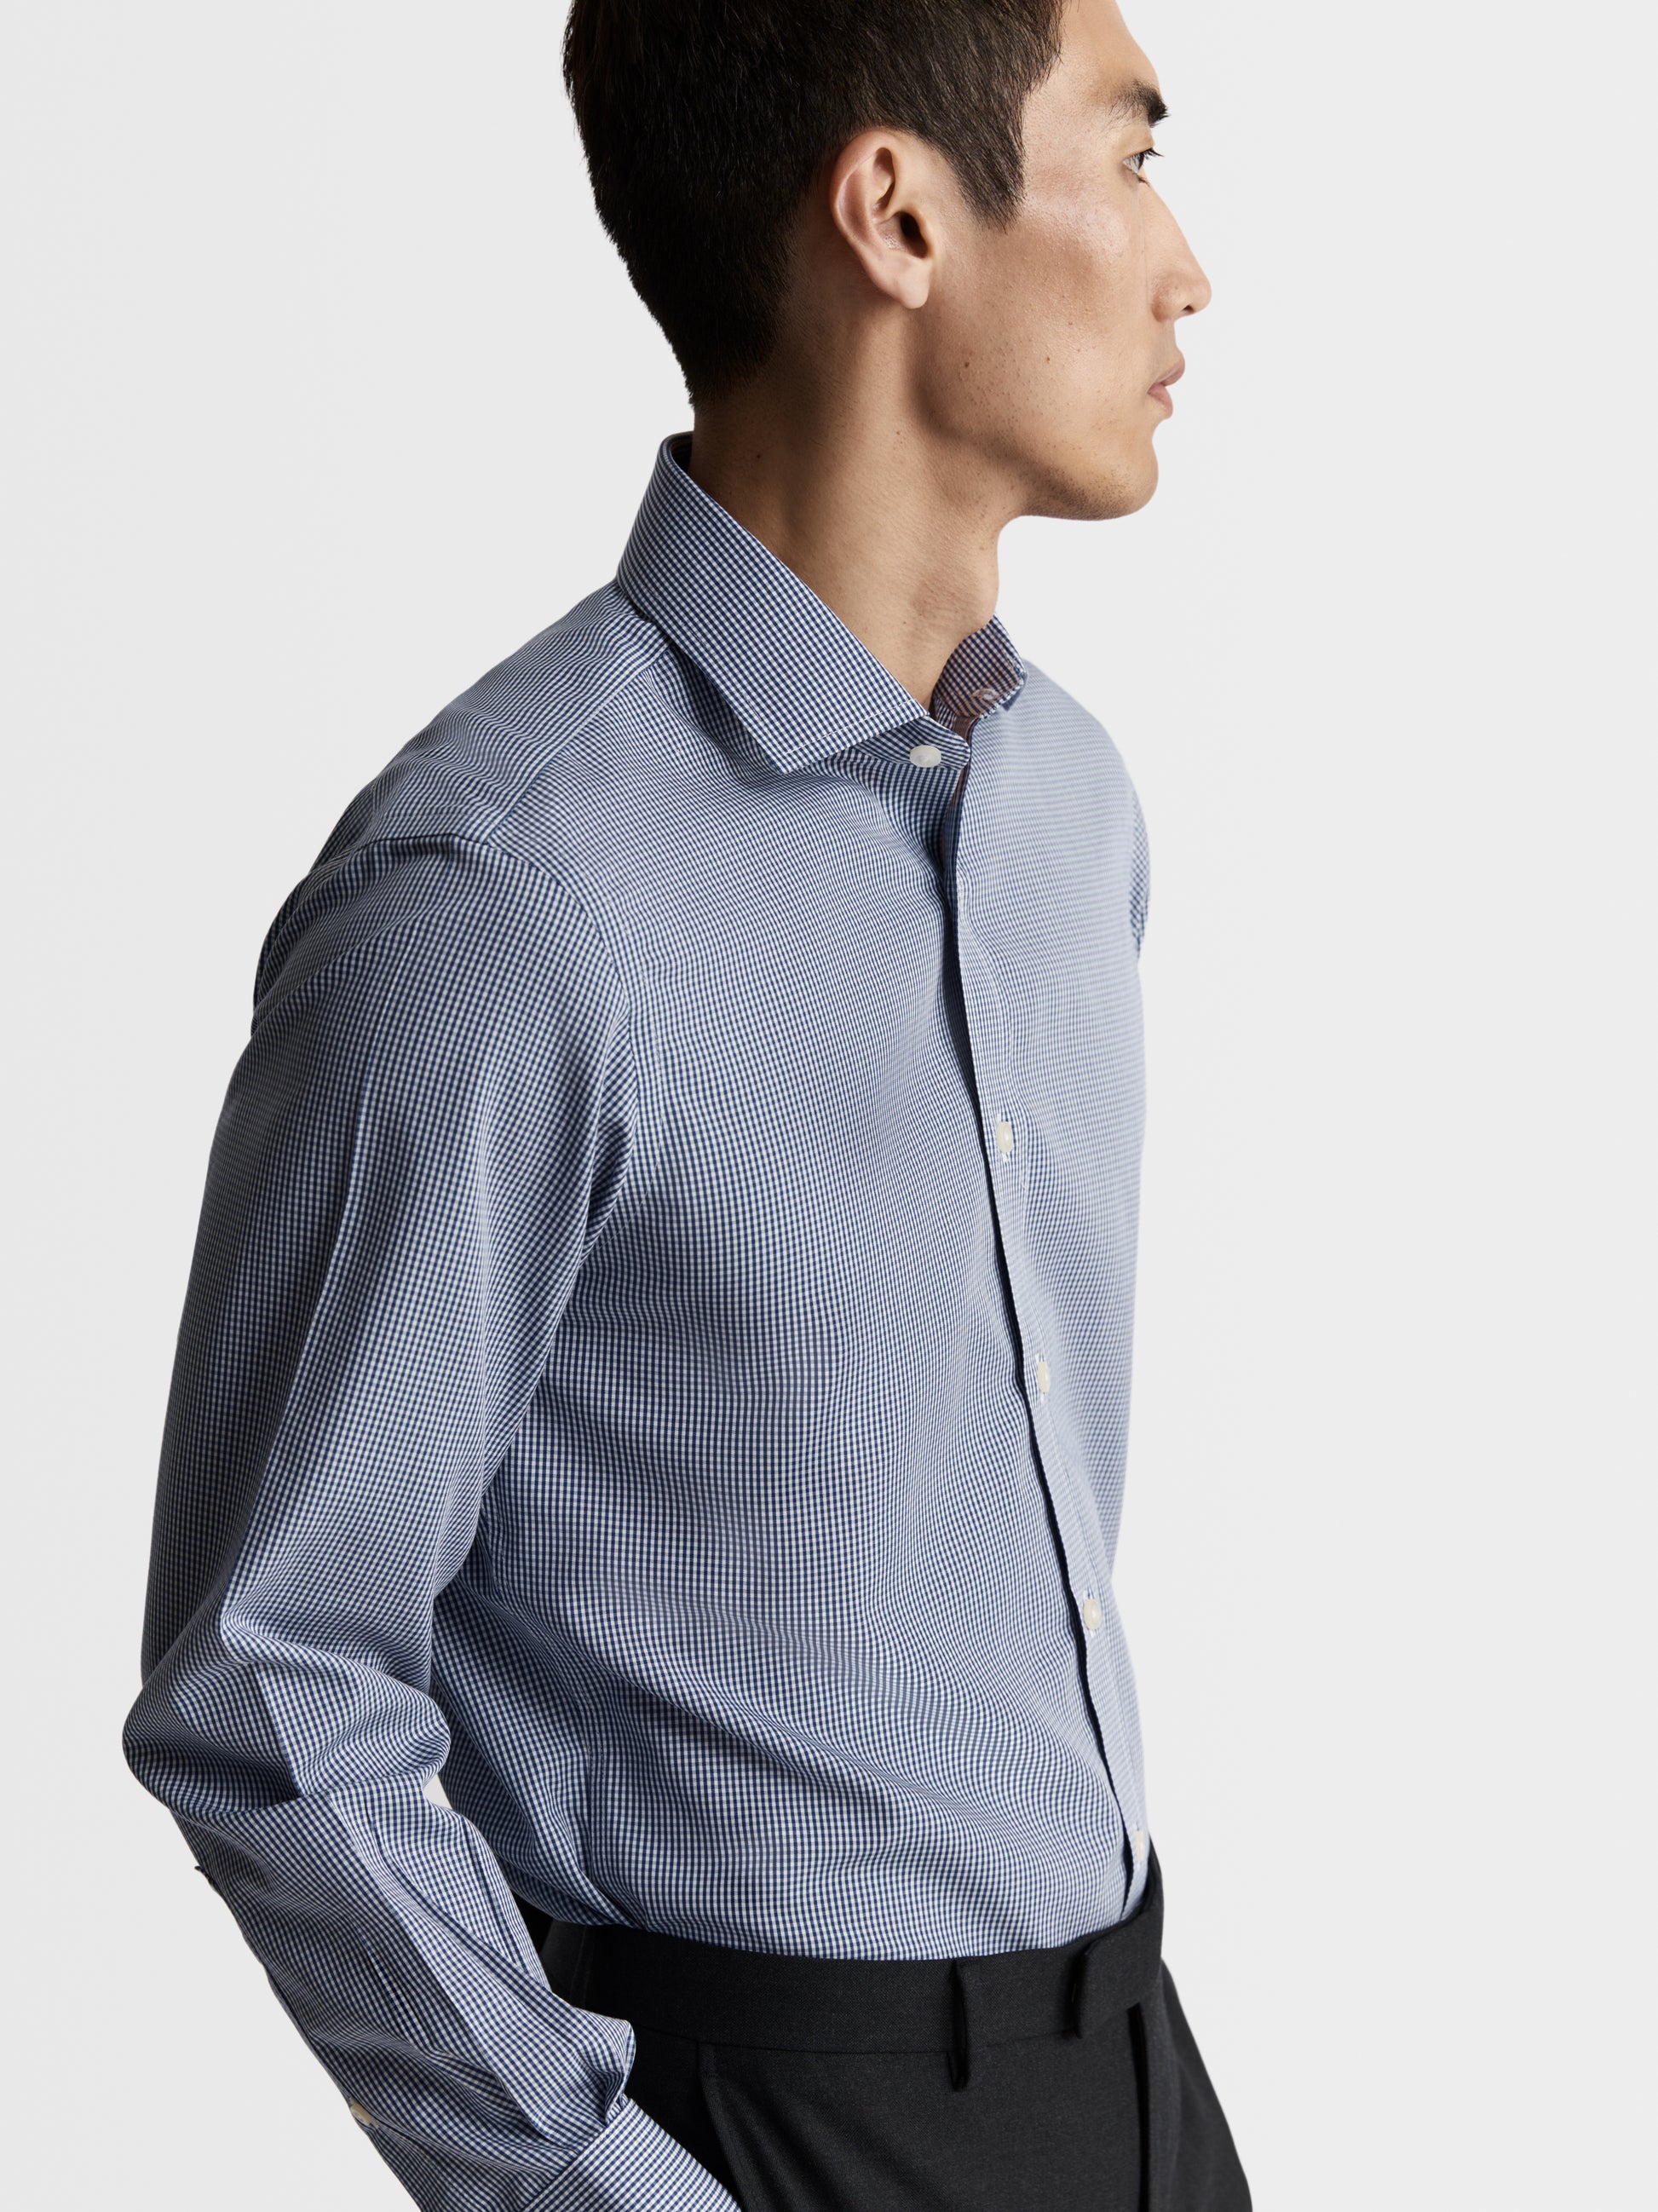 Image 2 of Non-Iron Navy Blue Mini Gingham Poplin Fitted Single Cuff Classic Collar Shirt